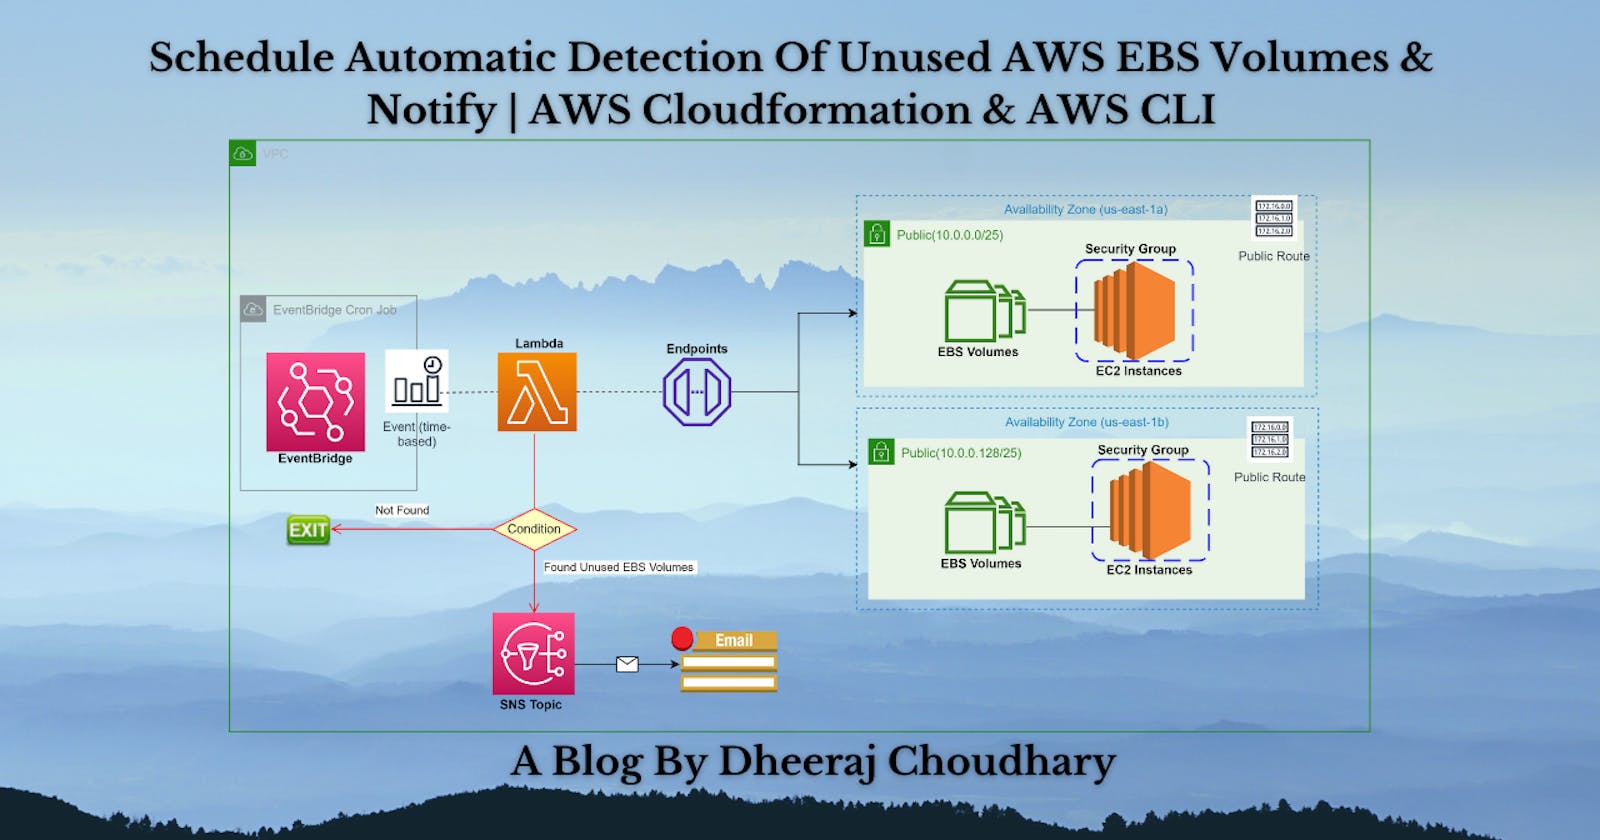 Schedule Automatic Detection Of Unused AWS EBS Volumes & Notify | AWS Cloudformation & AWS CLI